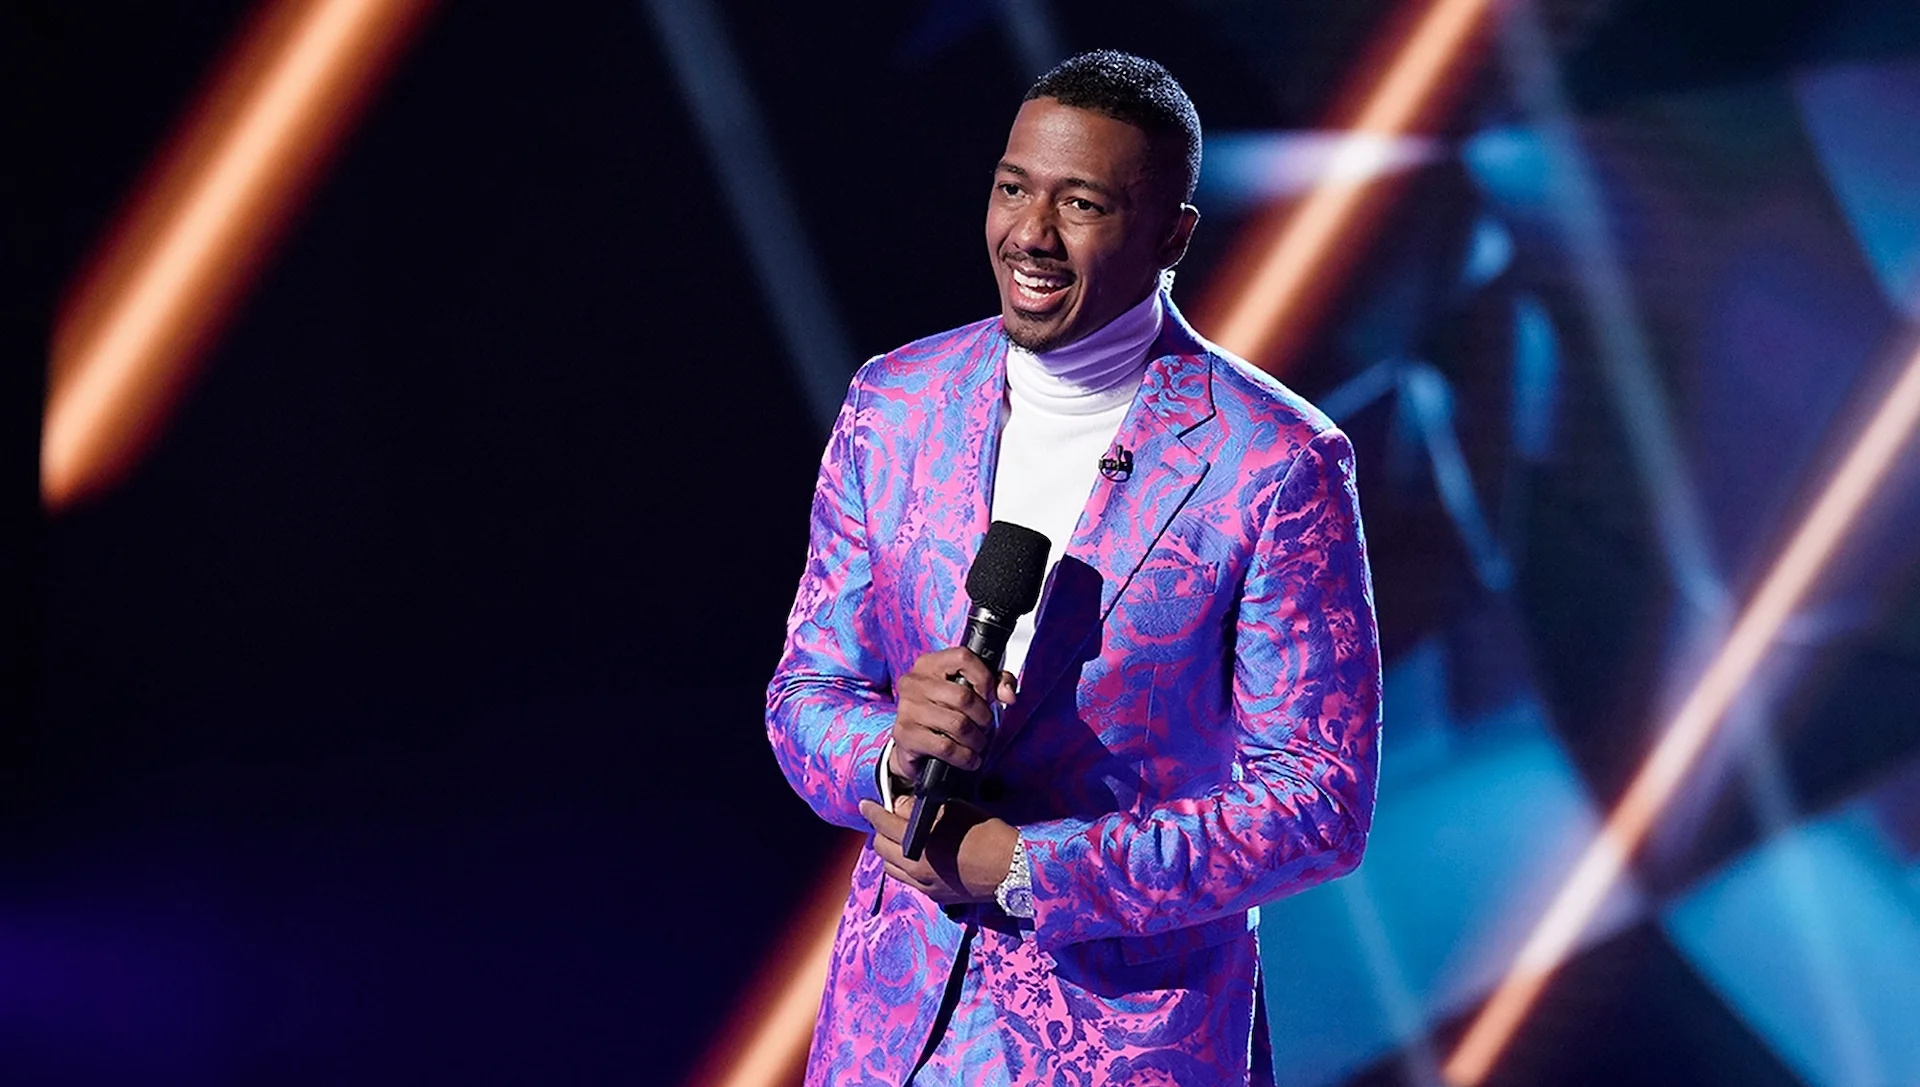 Nick Cannon, Masked Singer host, Controversial remarks, Essence interview, 1920x1090 HD Desktop